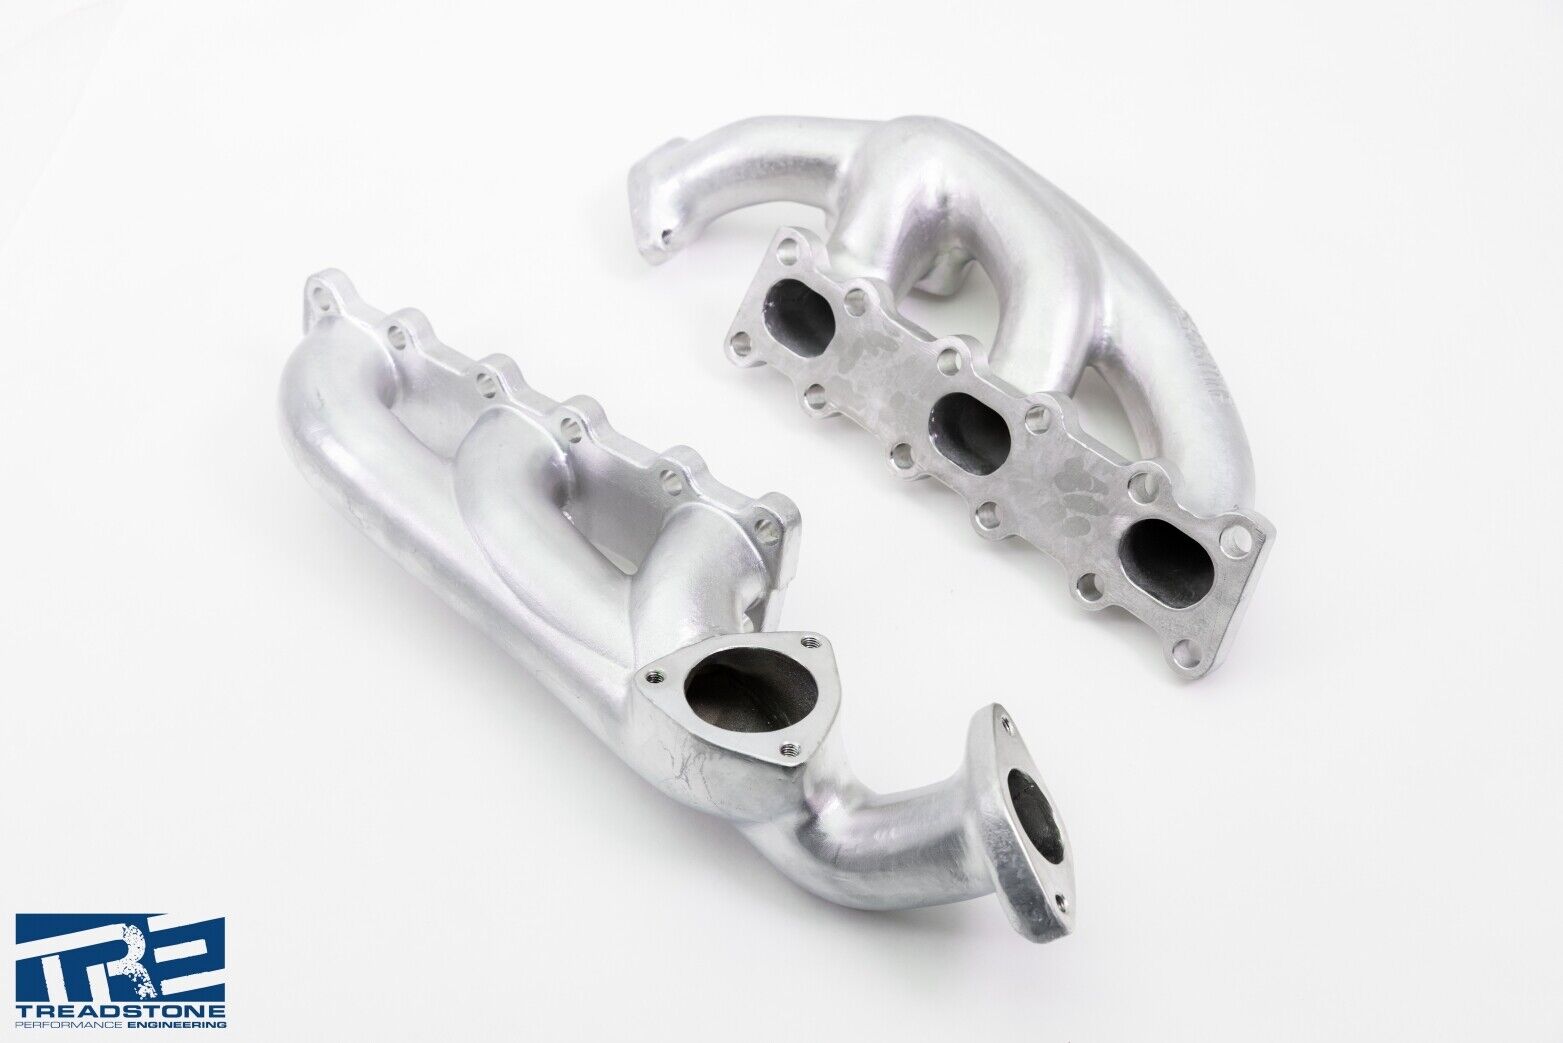 Treadstone Performance Twin Turbo Replacement Manifolds for Nissan 350z/370z 